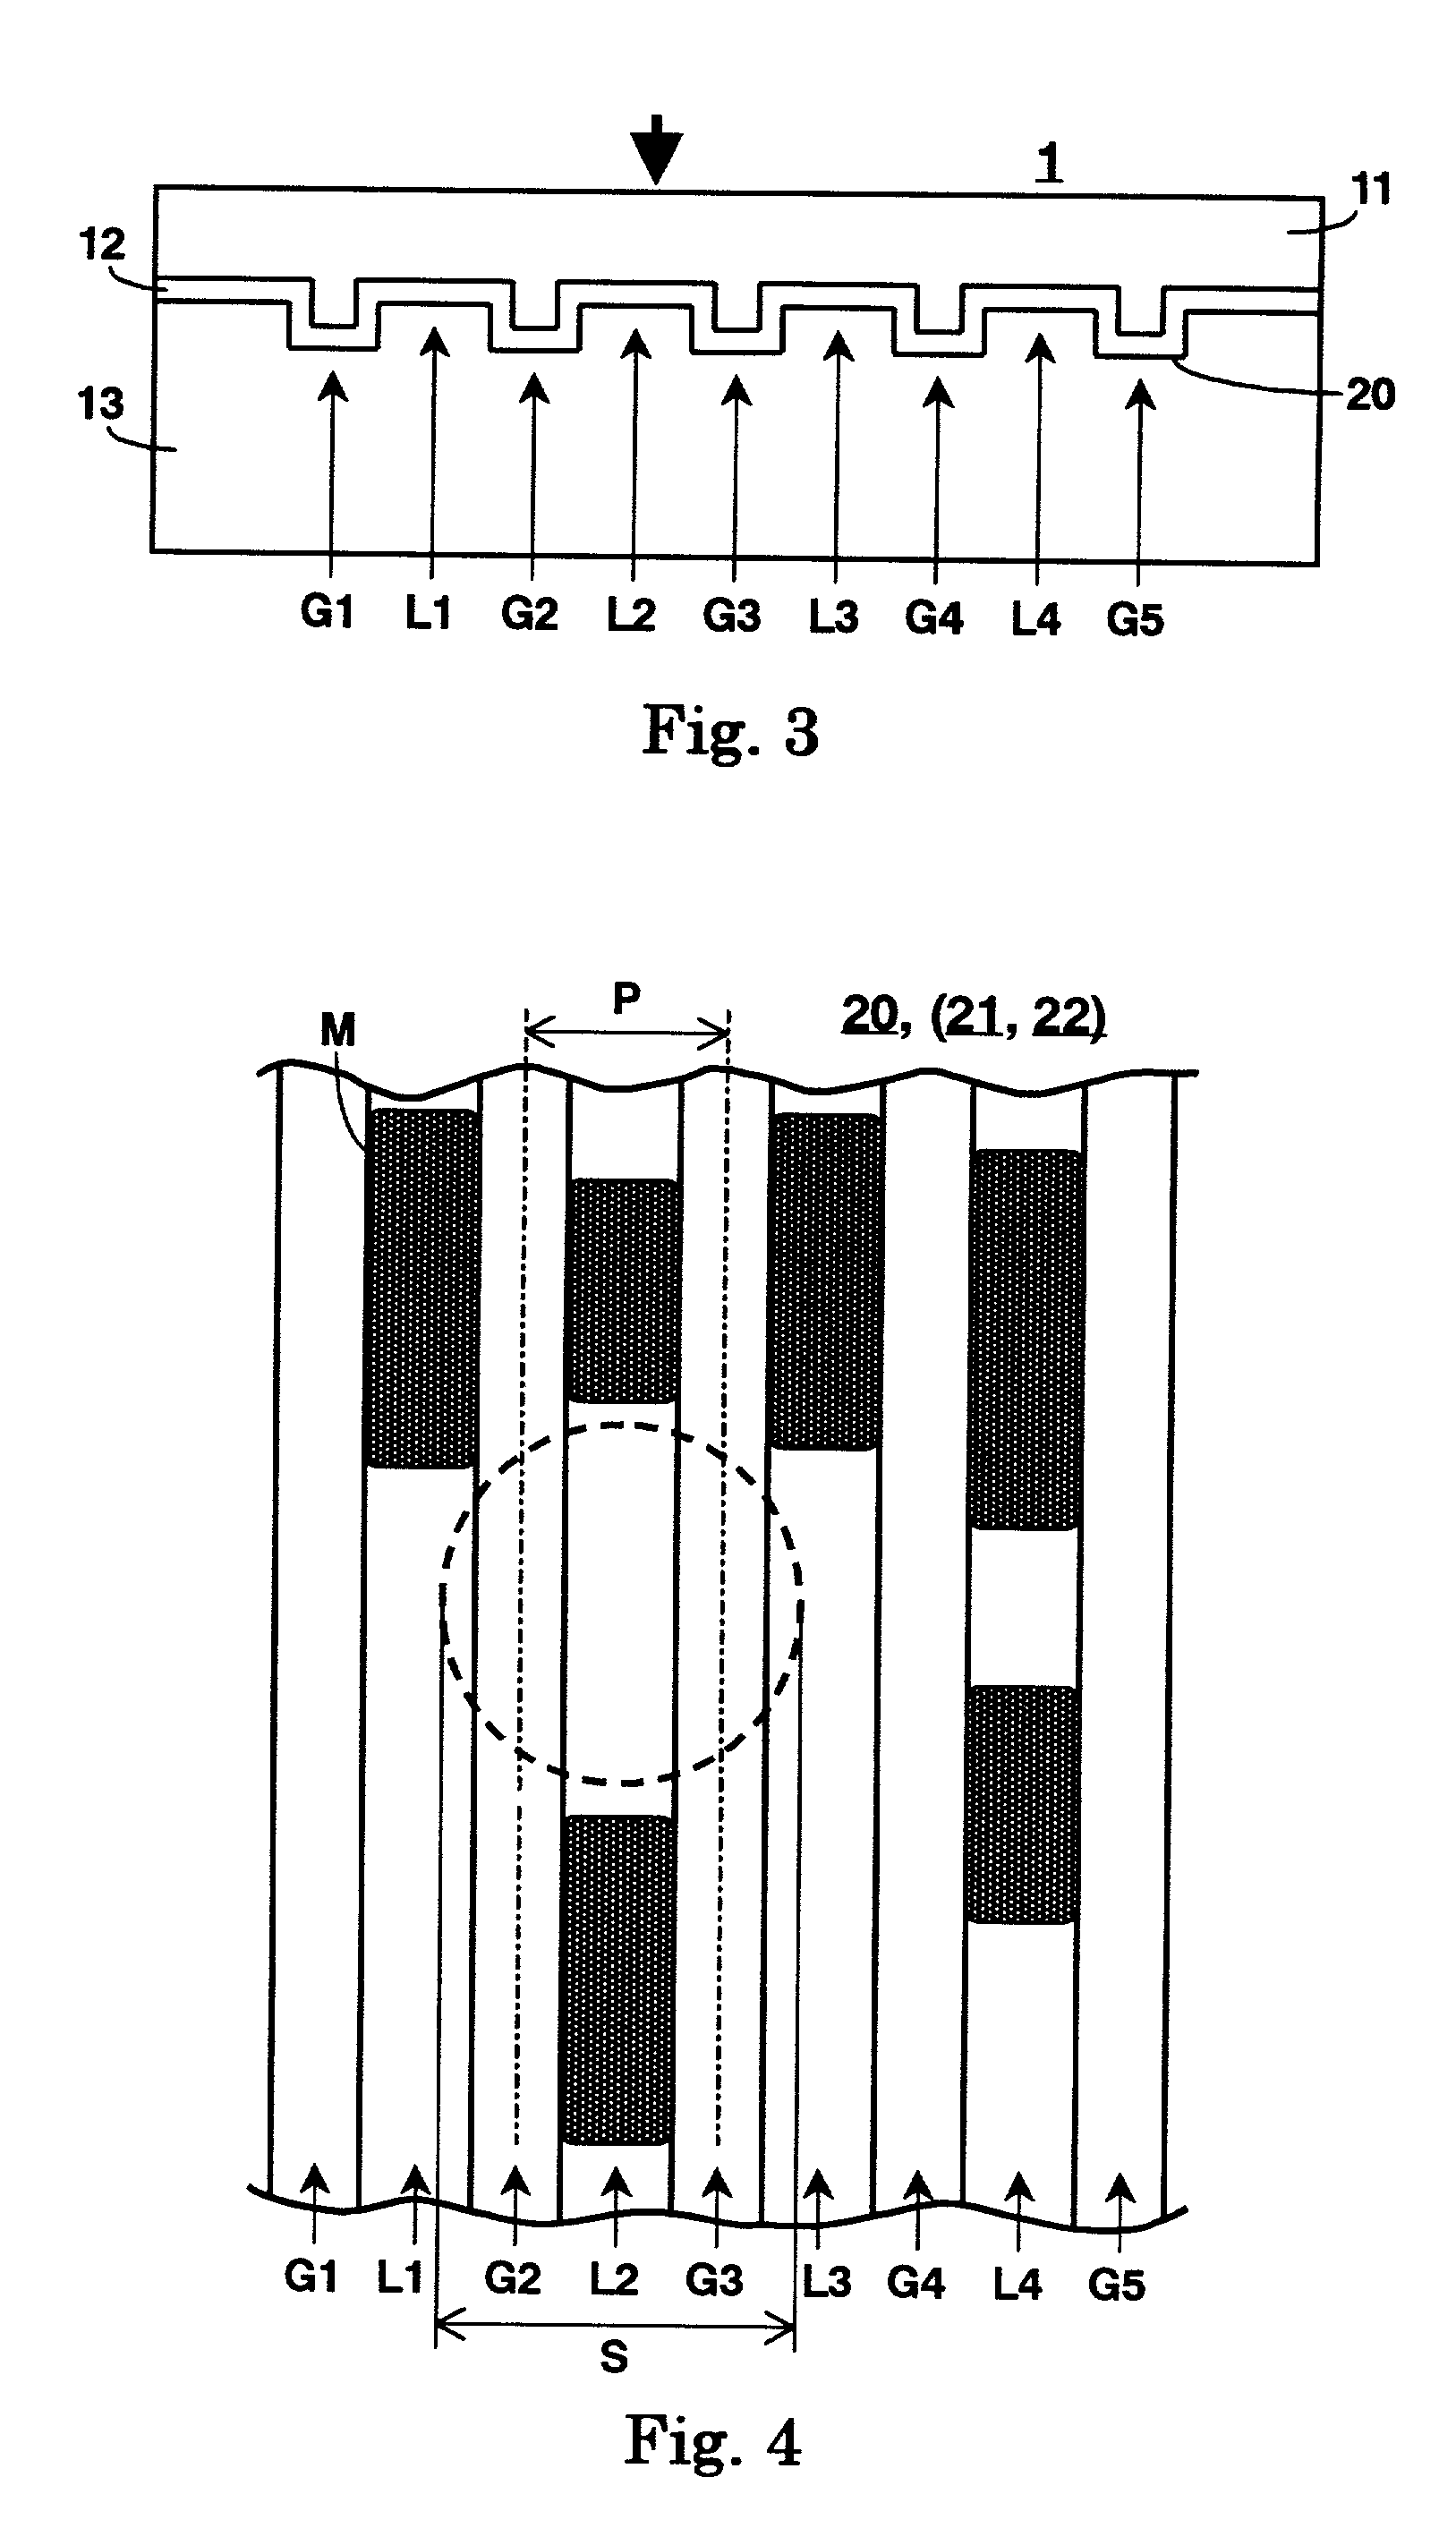 Recording medium having a substrate containing microscopic pattern of parallel groove and land sections and recording/reproducing equipment therefor